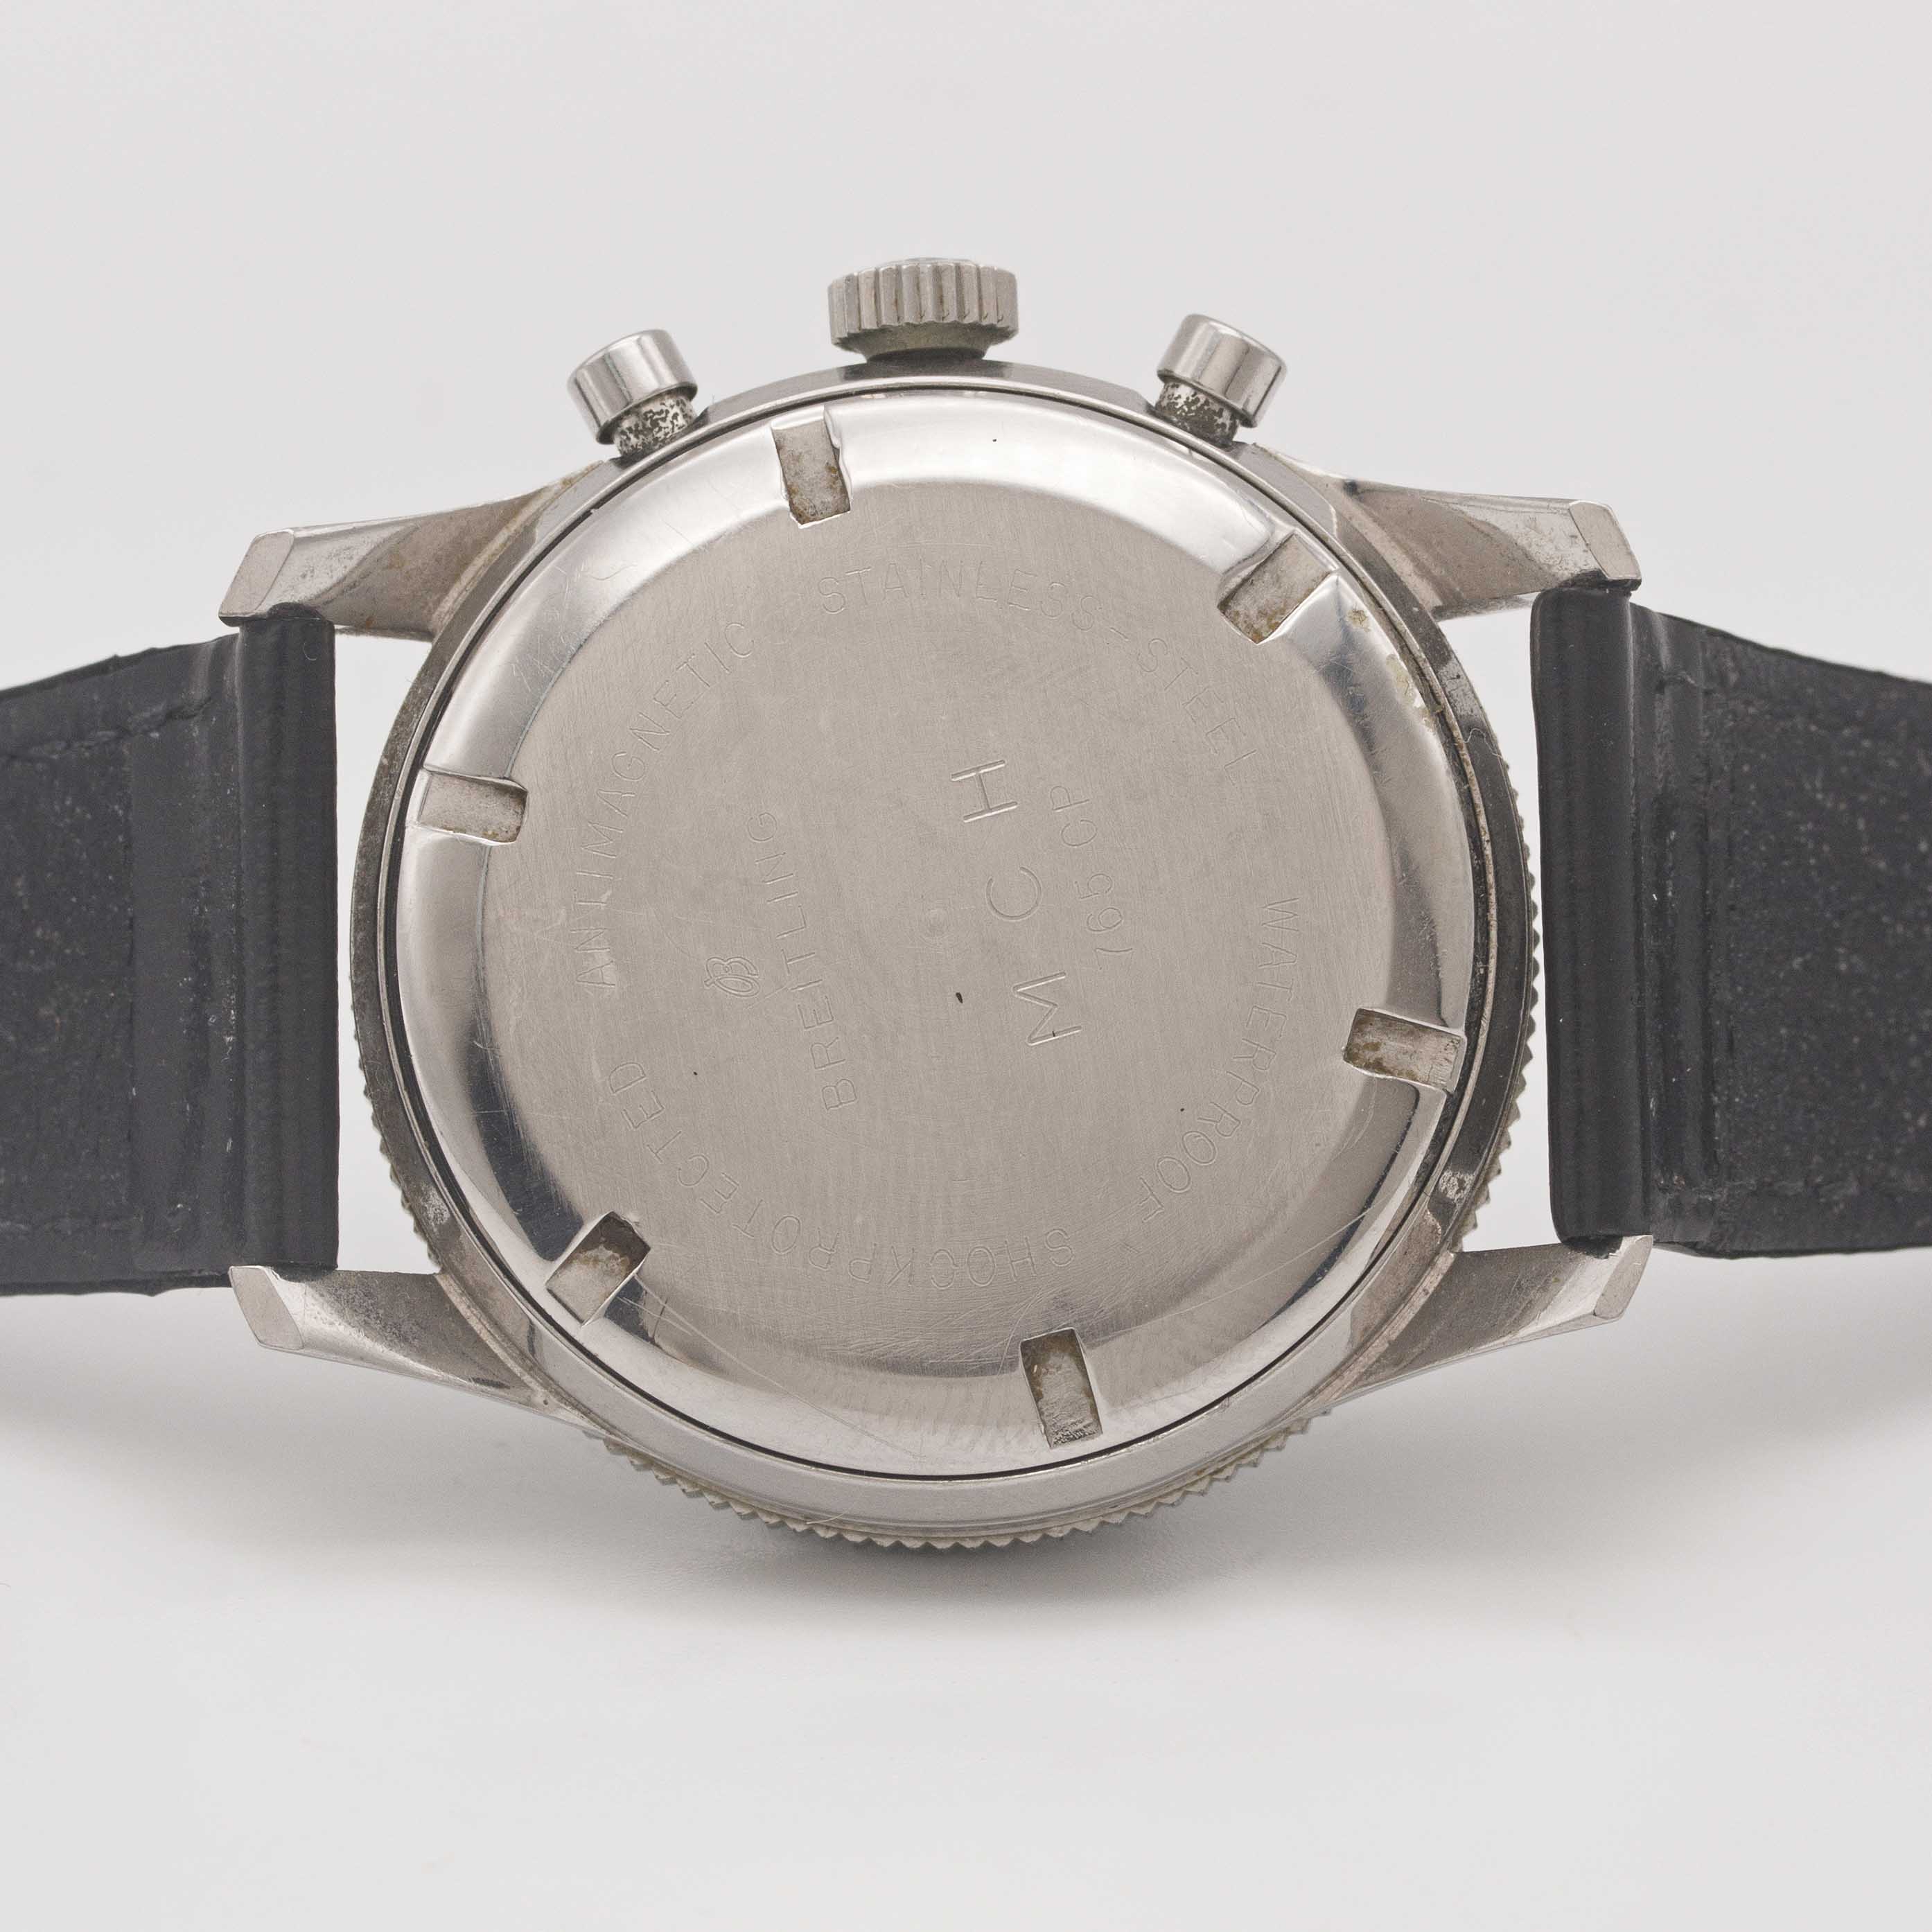 A RARE GENTLEMAN'S STAINLESS STEEL BREITLING 765 CO PILOT CHRONOGRAPH WRIST WATCH CIRCA 1966, REF. - Image 7 of 10